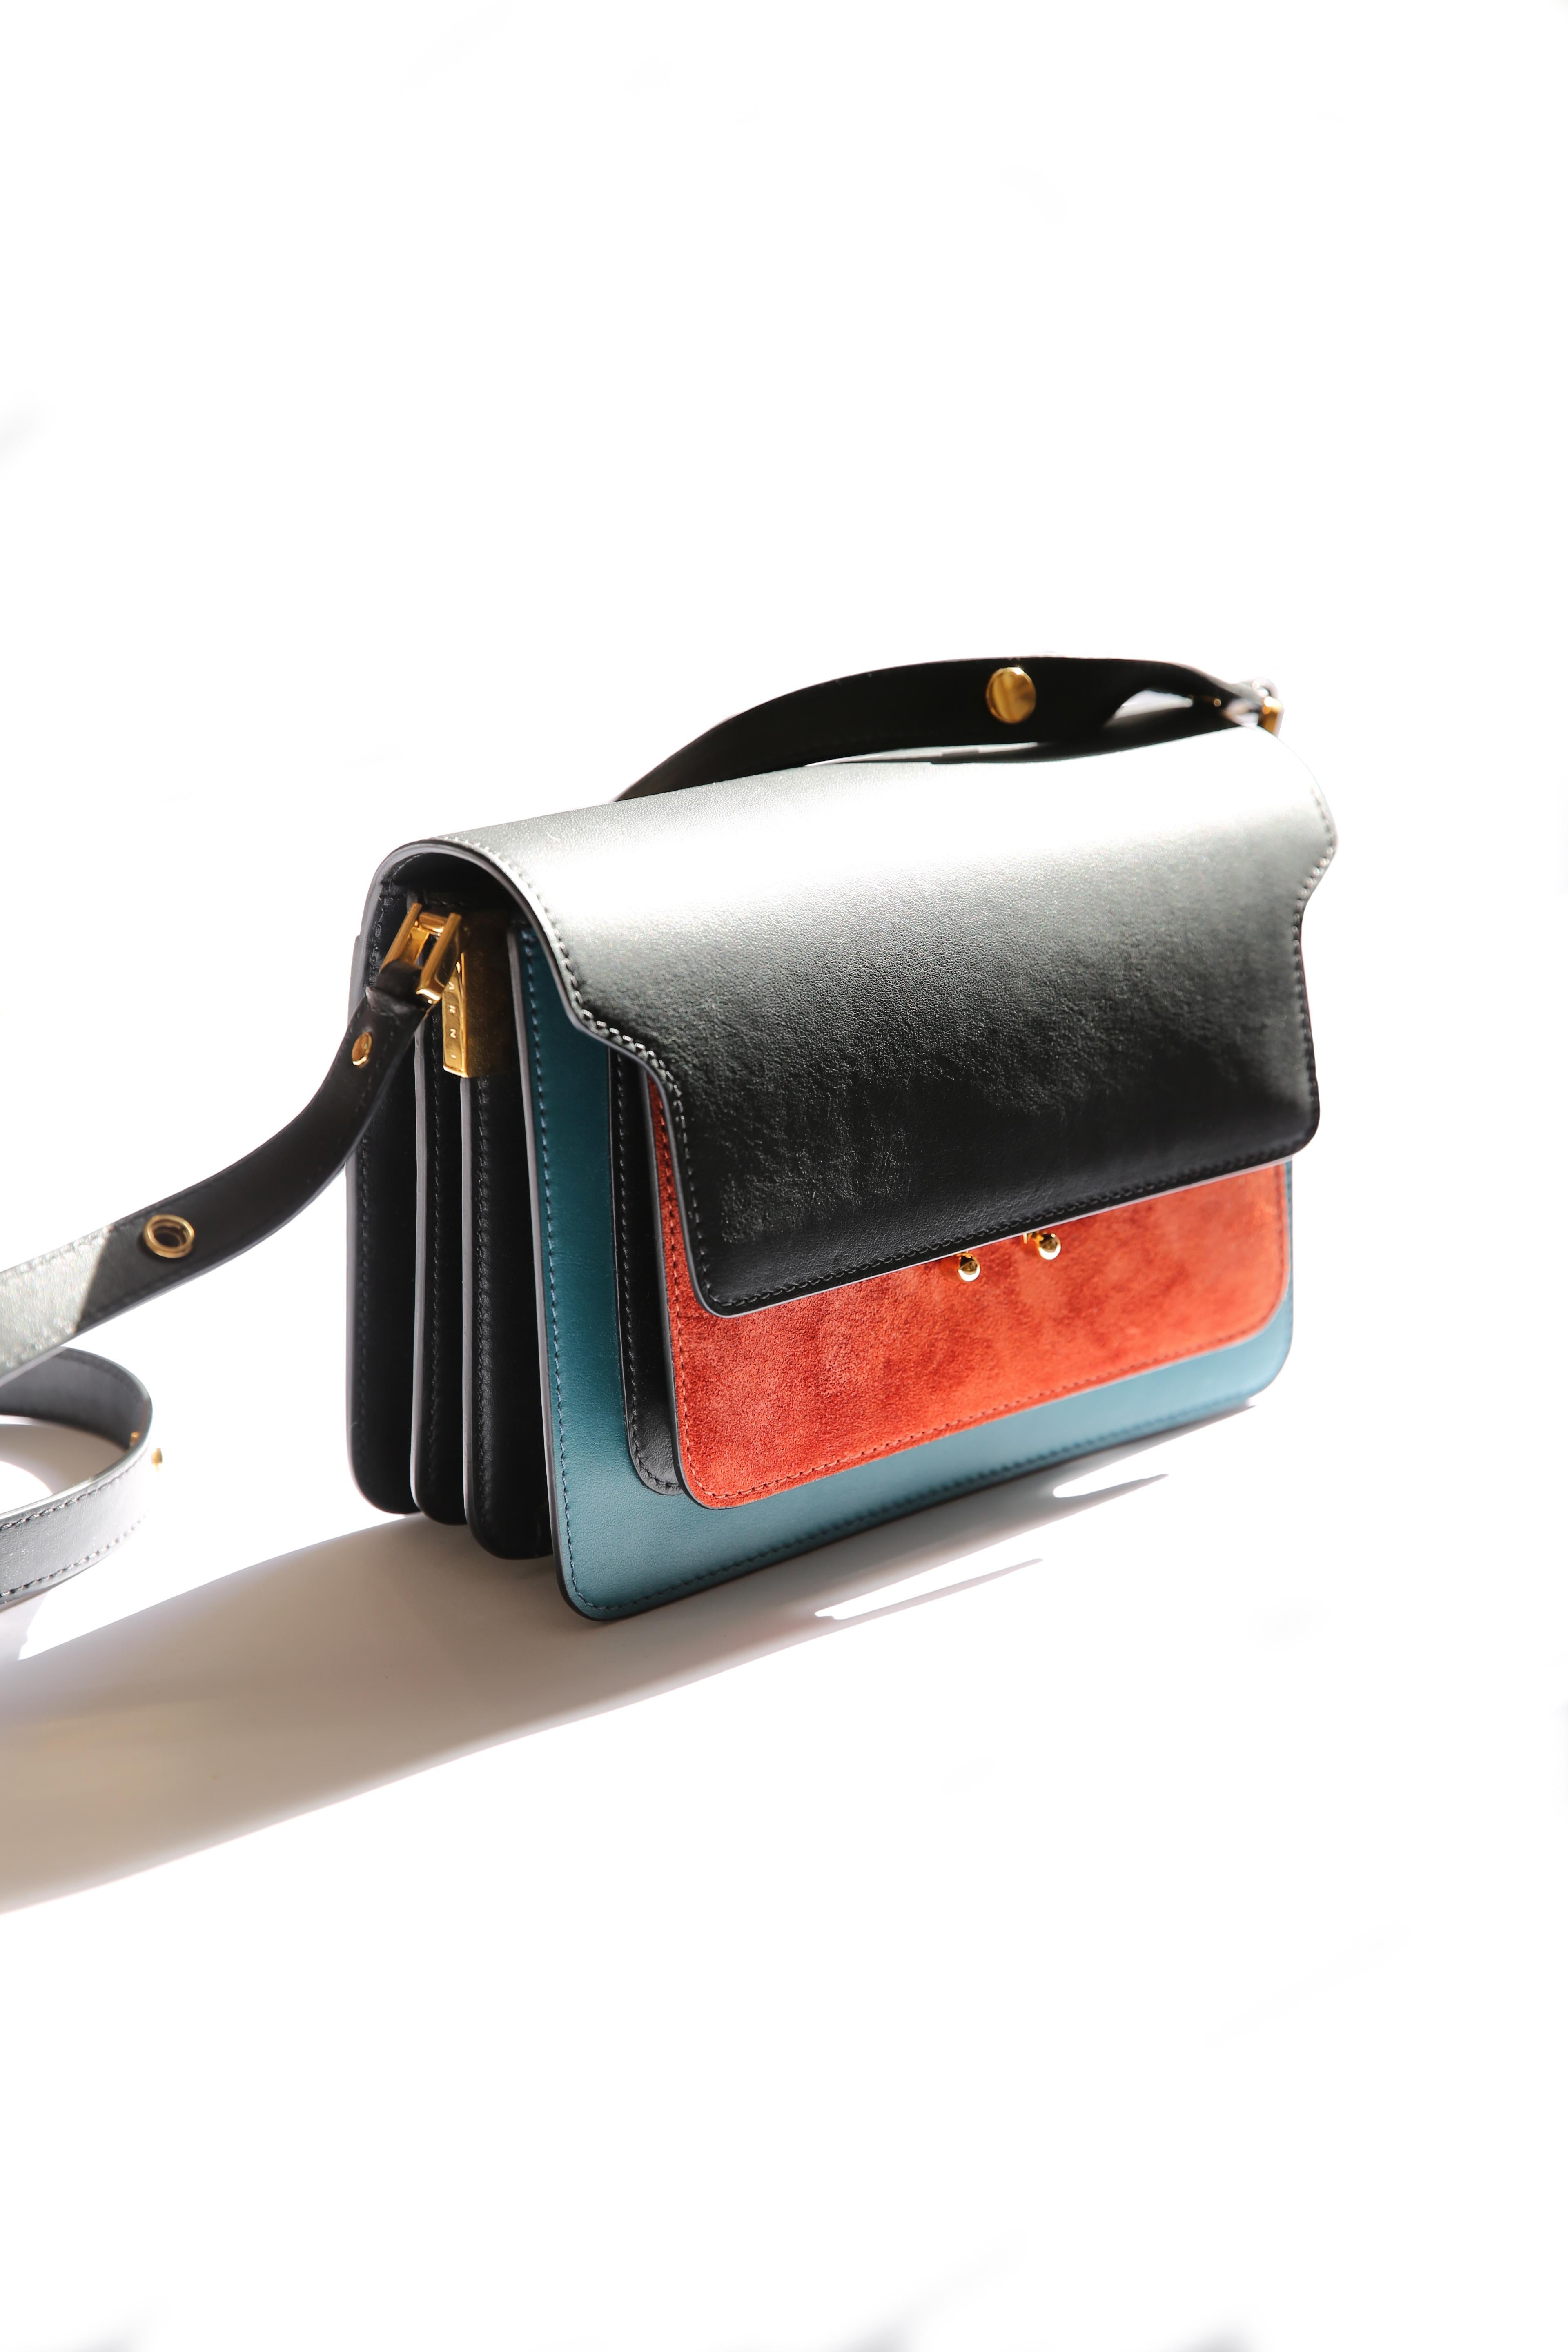 LOVE LALI Vintage

Limited edition Marni trunk shoulder color block bag in smooth black and teal leather and rust coloured suede
This structured piece with gusseted sides is roomier than you might expect, featuring two zipped pouches along with four